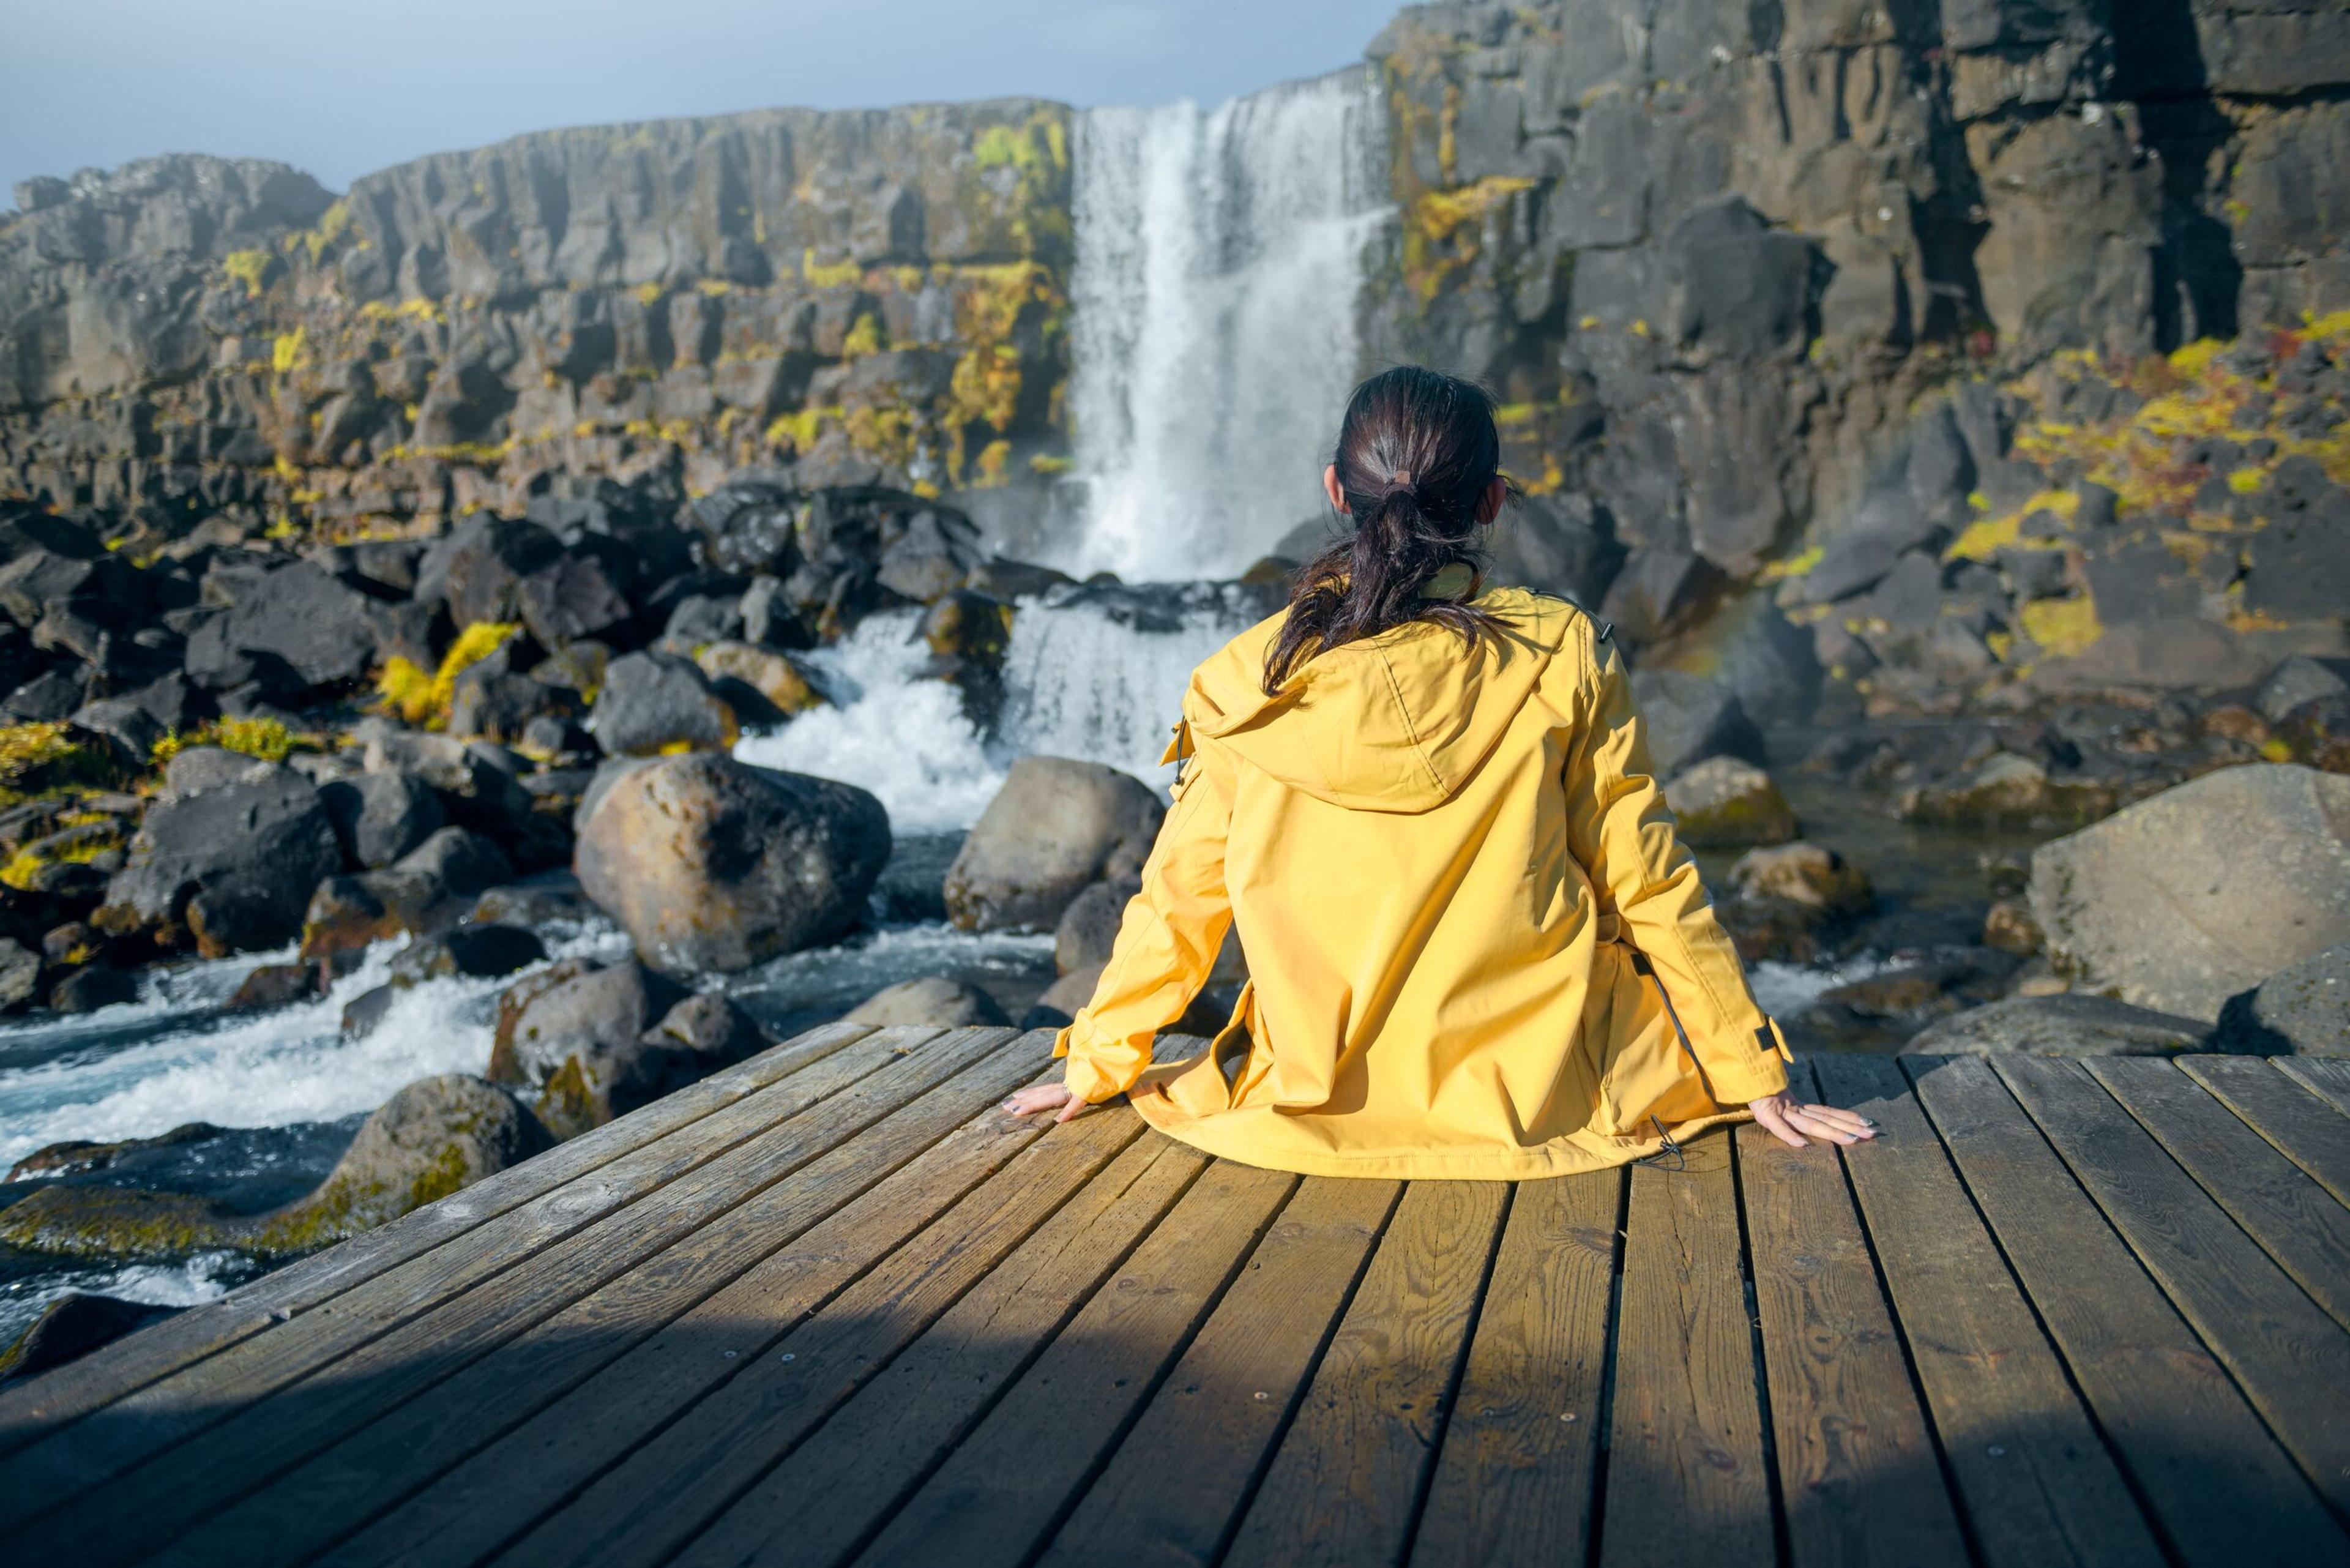 A person in a yellow jacket sitting on a wooden deck, gazing at a waterfall cascading down a rugged cliff amidst a rocky landscape, a moment of peaceful reflection in nature.